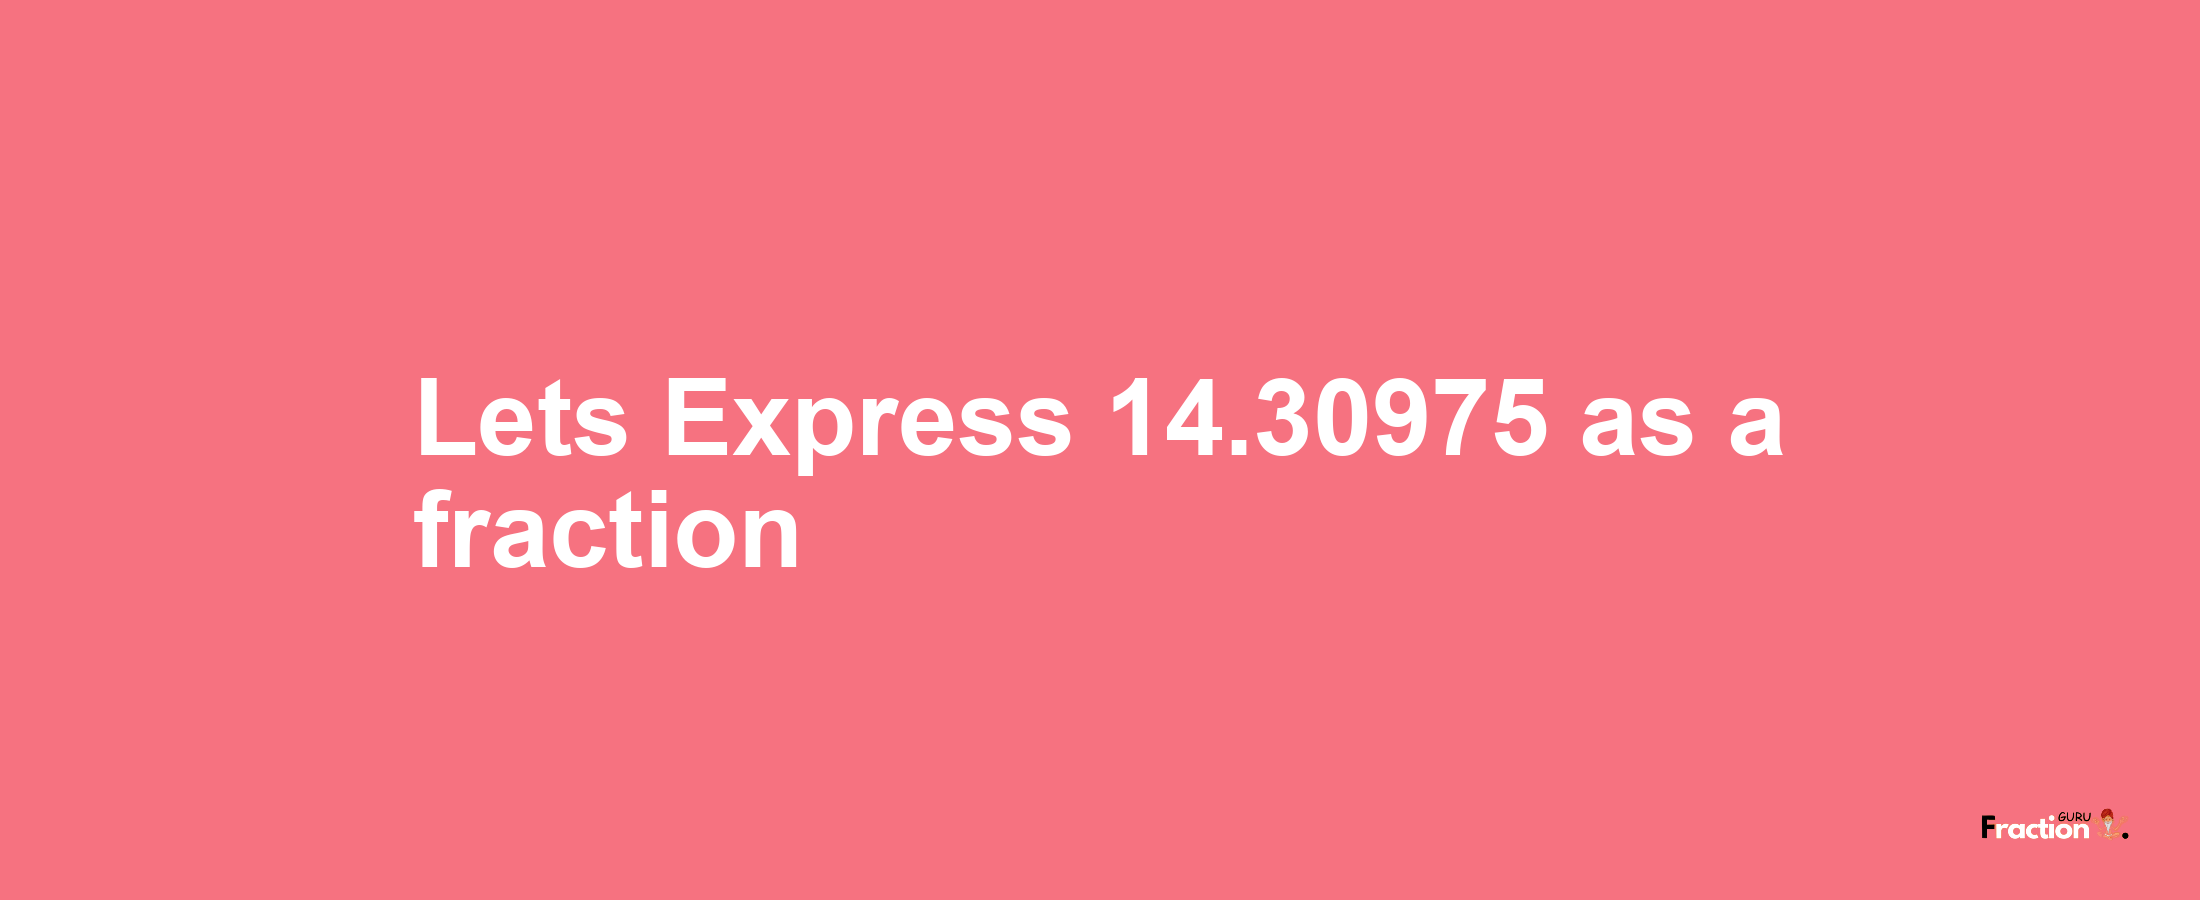 Lets Express 14.30975 as afraction